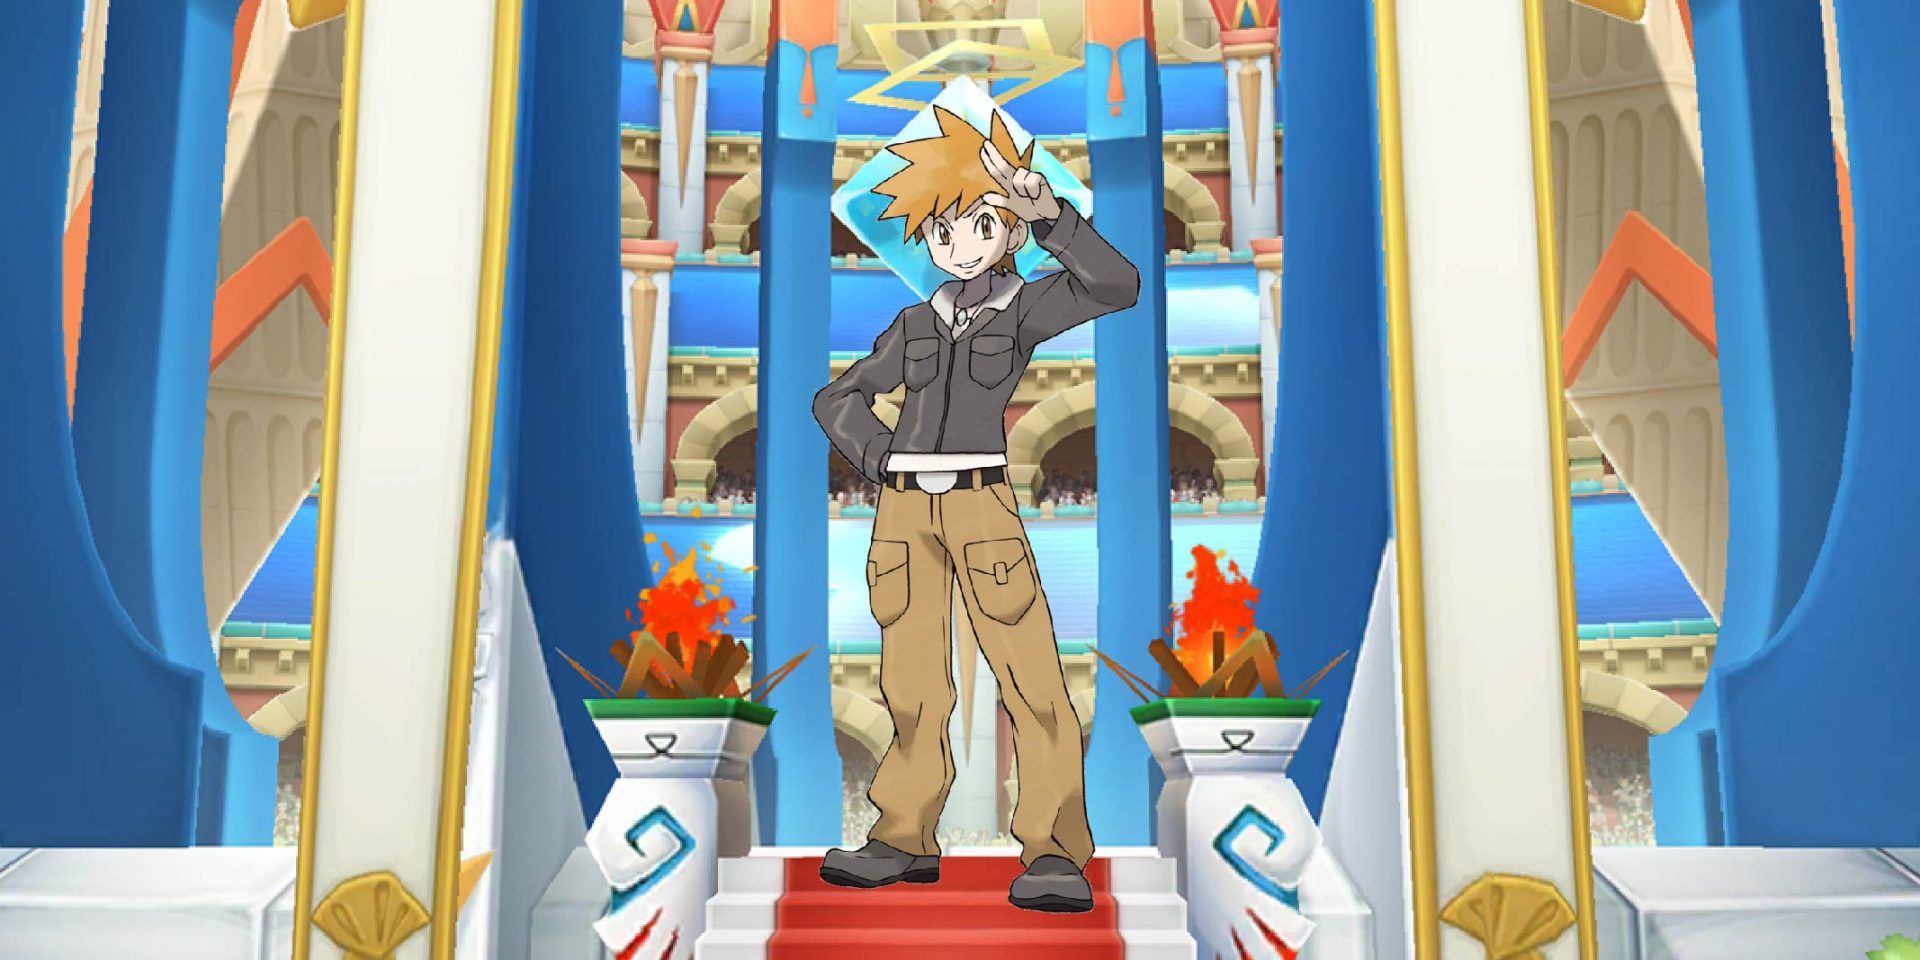 Blue from Pokémon standing against an arena backdrop.